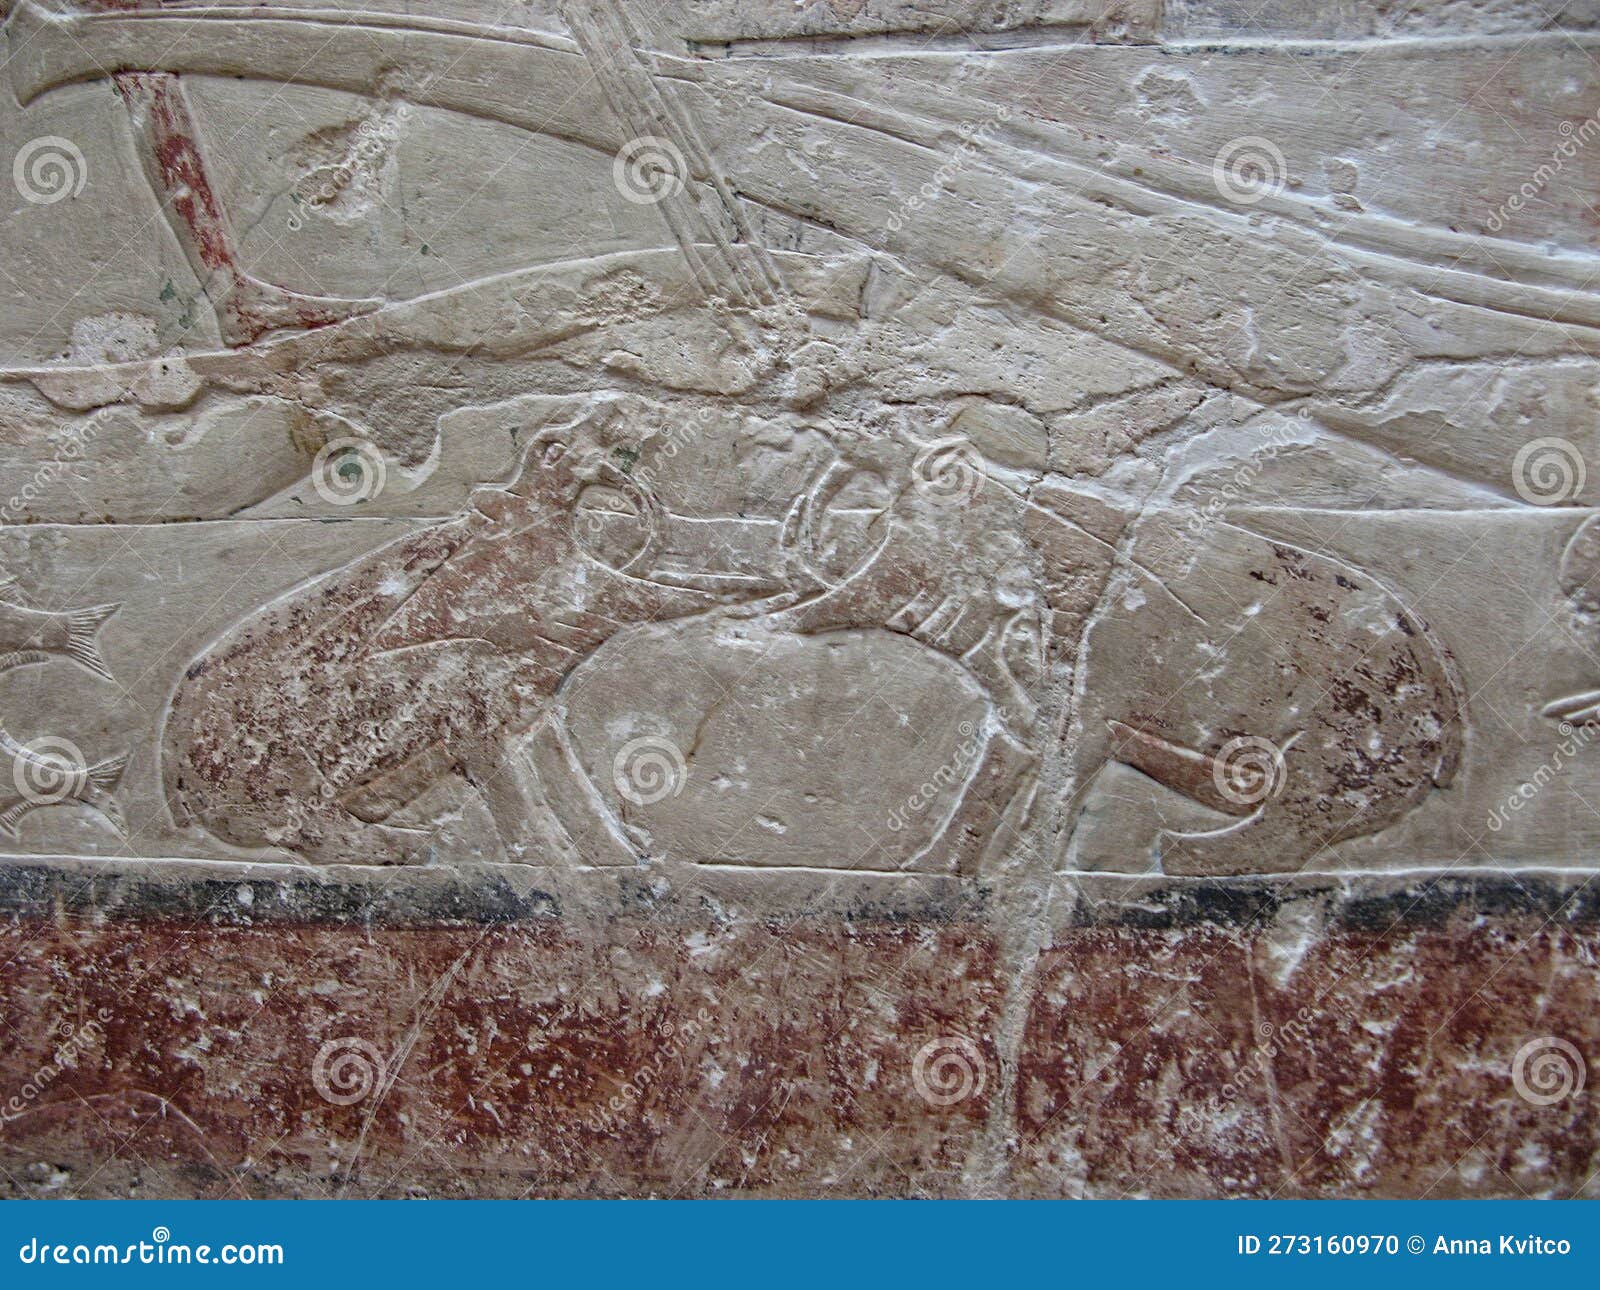 two hippos, a hieroglyph in the ancient egypt tomb of princess idut